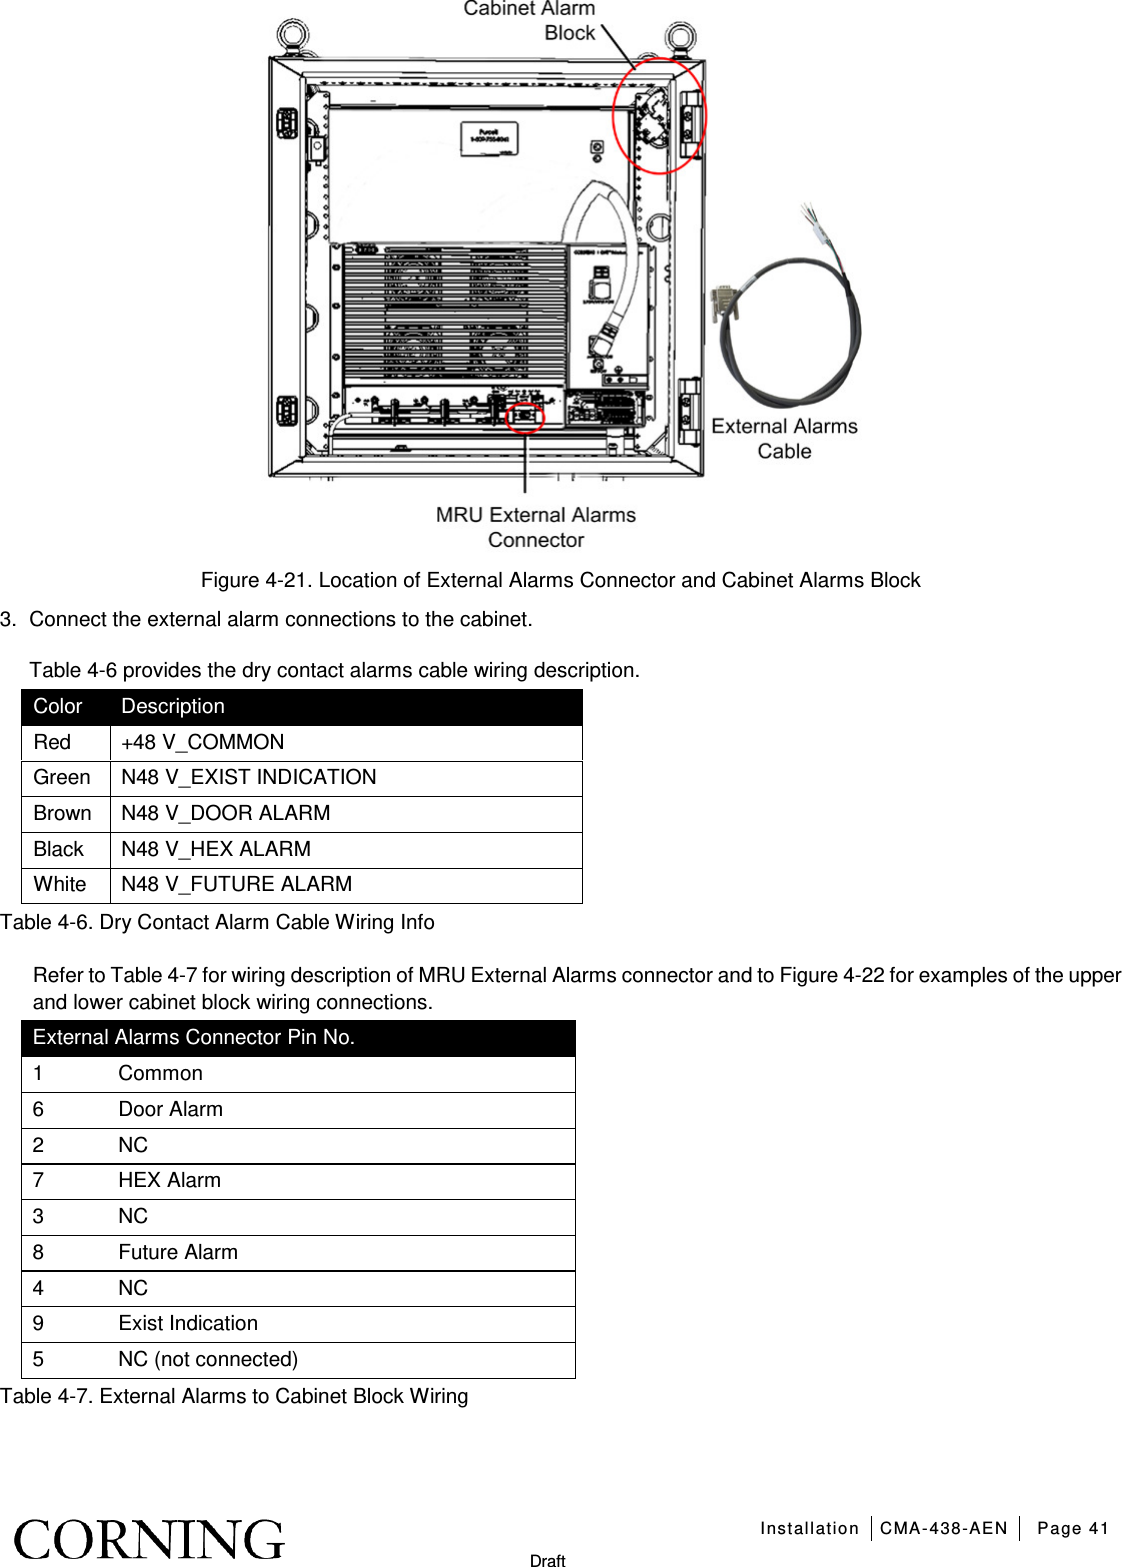   Installation CMA-438-AEN Page 41   Draft  Figure  4-21. Location of External Alarms Connector and Cabinet Alarms Block 3.  Connect the external alarm connections to the cabinet. Table  4-6 provides the dry contact alarms cable wiring description. Color Description Red +48 V_COMMON Green N48 V_EXIST INDICATION Brown N48 V_DOOR ALARM Black N48 V_HEX ALARM White N48 V_FUTURE ALARM Table  4-6. Dry Contact Alarm Cable Wiring Info Refer to Table  4-7 for wiring description of MRU External Alarms connector and to Figure  4-22 for examples of the upper and lower cabinet block wiring connections. External Alarms Connector Pin No. 1  Common 6  Door Alarm 2  NC 7  HEX Alarm 3  NC 8  Future Alarm 4  NC 9  Exist Indication 5  NC (not connected) Table  4-7. External Alarms to Cabinet Block Wiring 